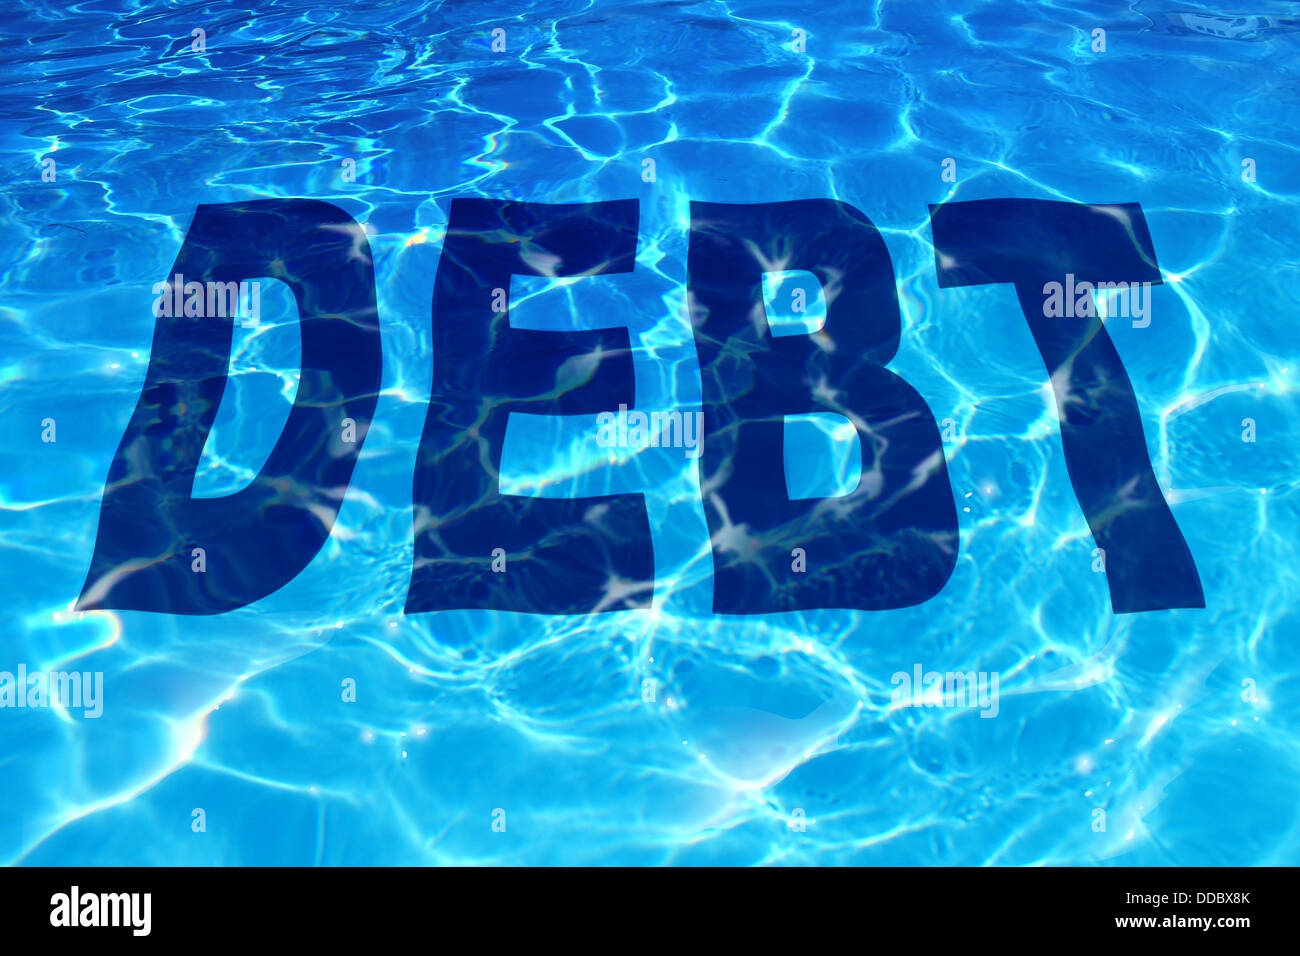 Drowning in debt business and finance concept with the word icon sinking under a sparkling reflection of blue pool of water as a Stock Photo